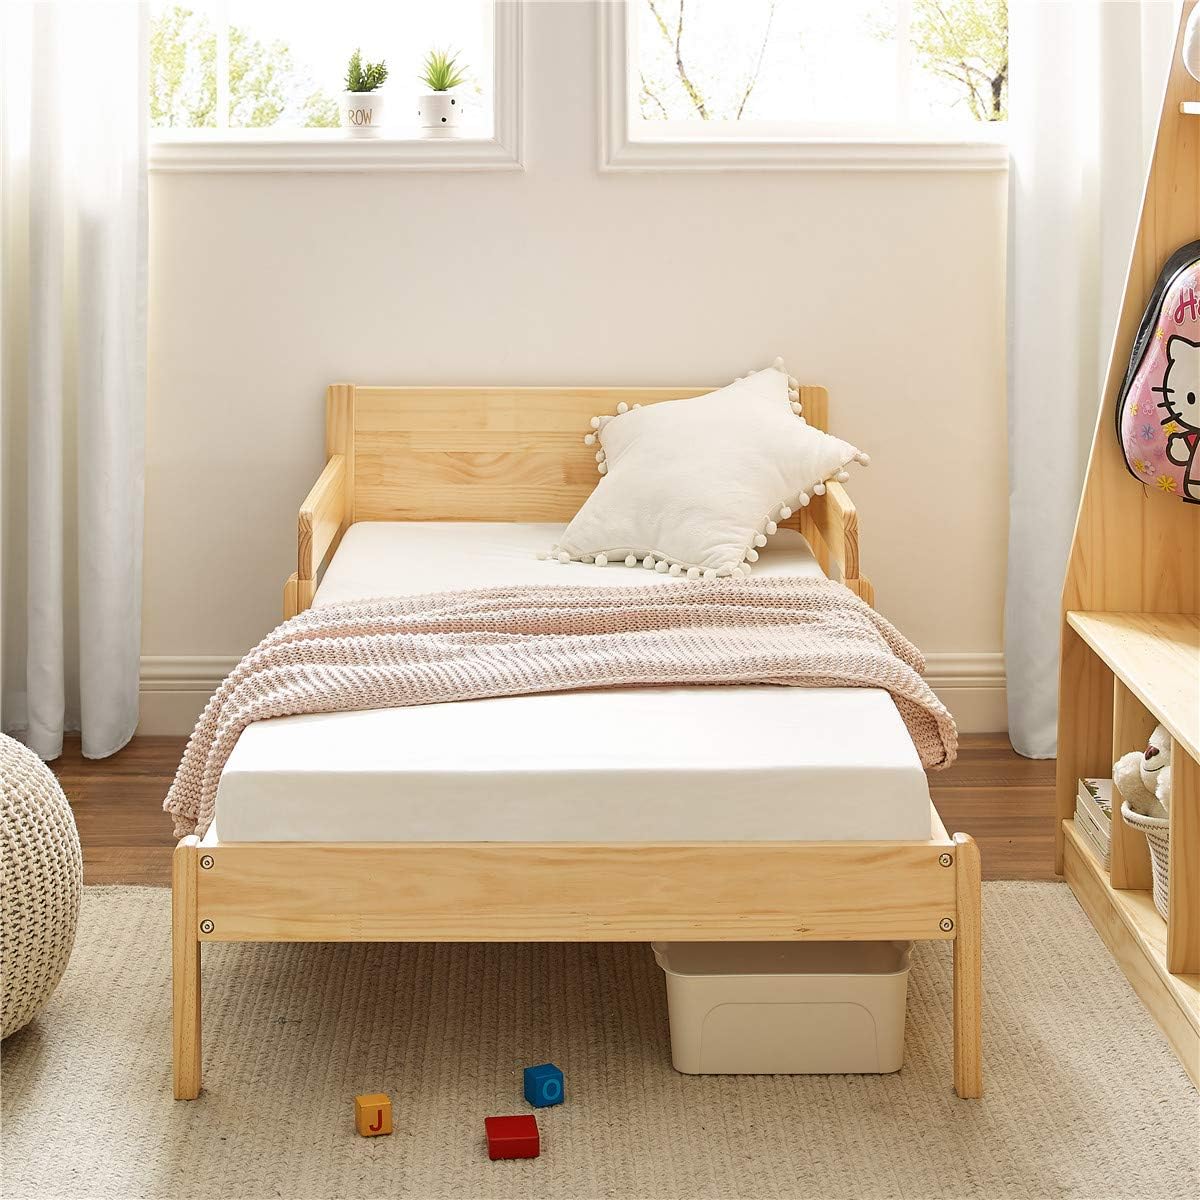 "Multifunctional 2 in 1 Convertible Toddler Bed | Solid Wood Kids Bed w/ Guardrails | Transform to Chair/Sofa | Fits Standard Crib Mattress | MUSEHOMEINC | AMAZON